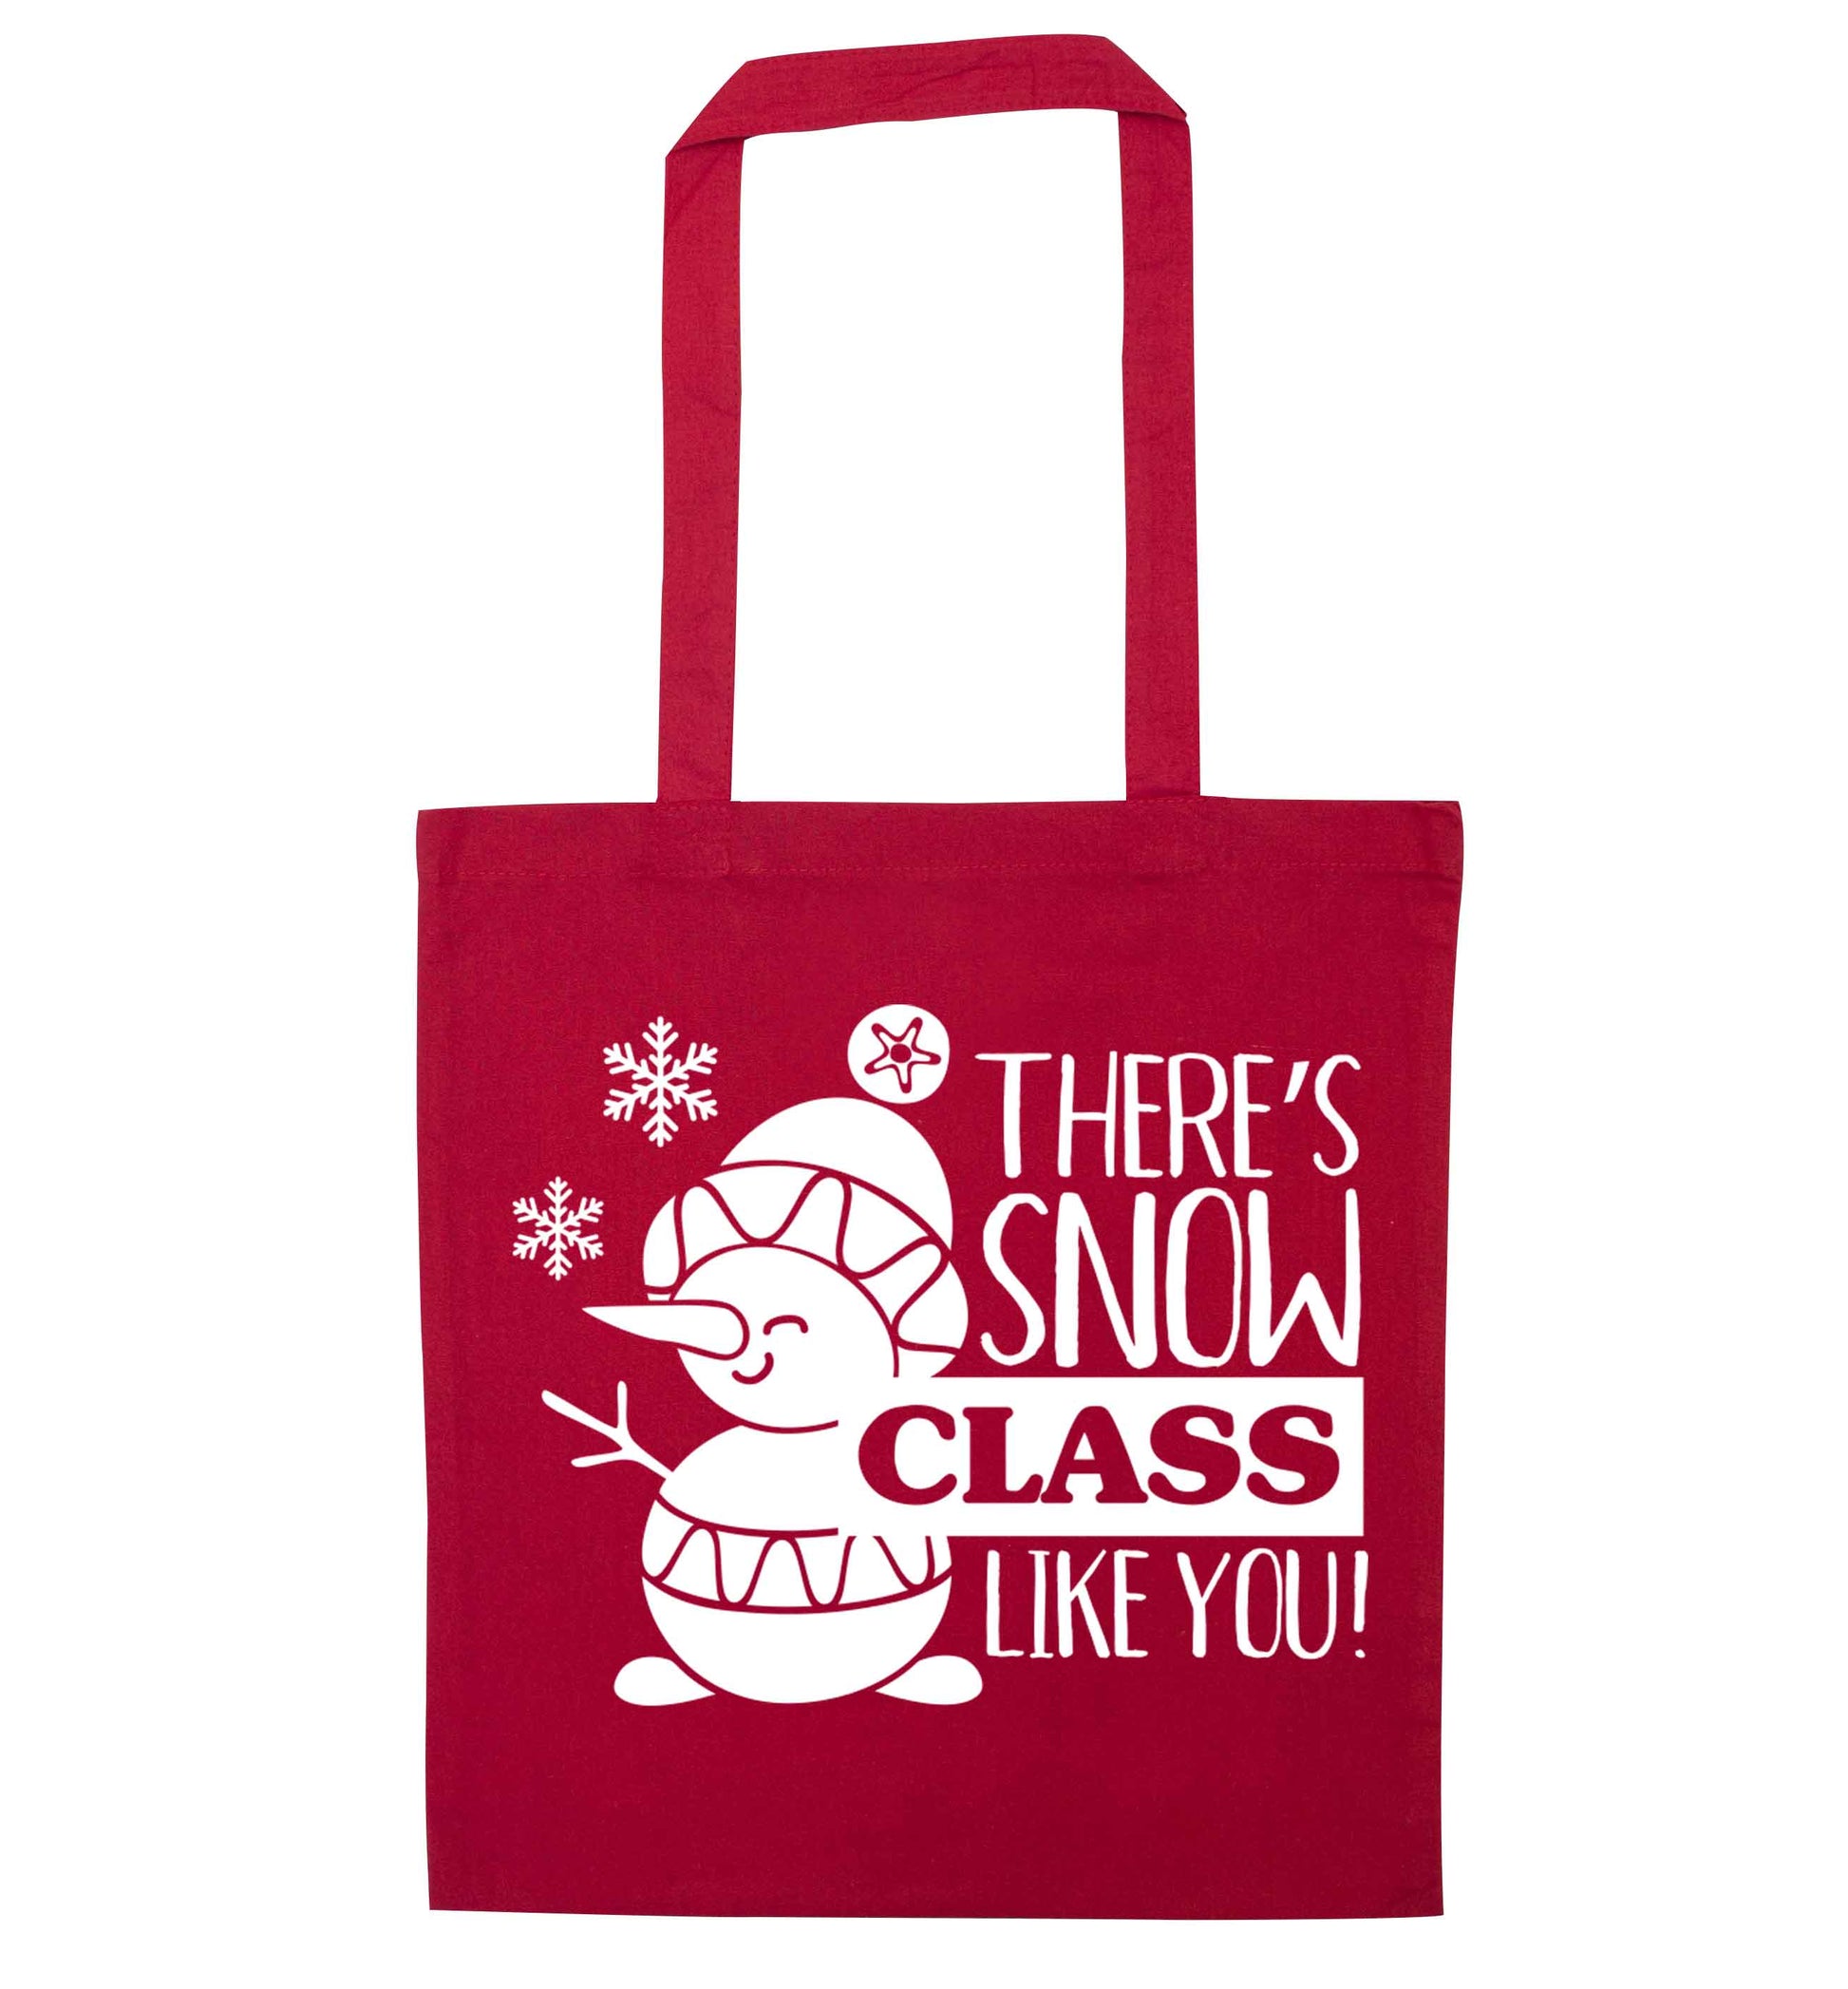 There's snow class like you red tote bag